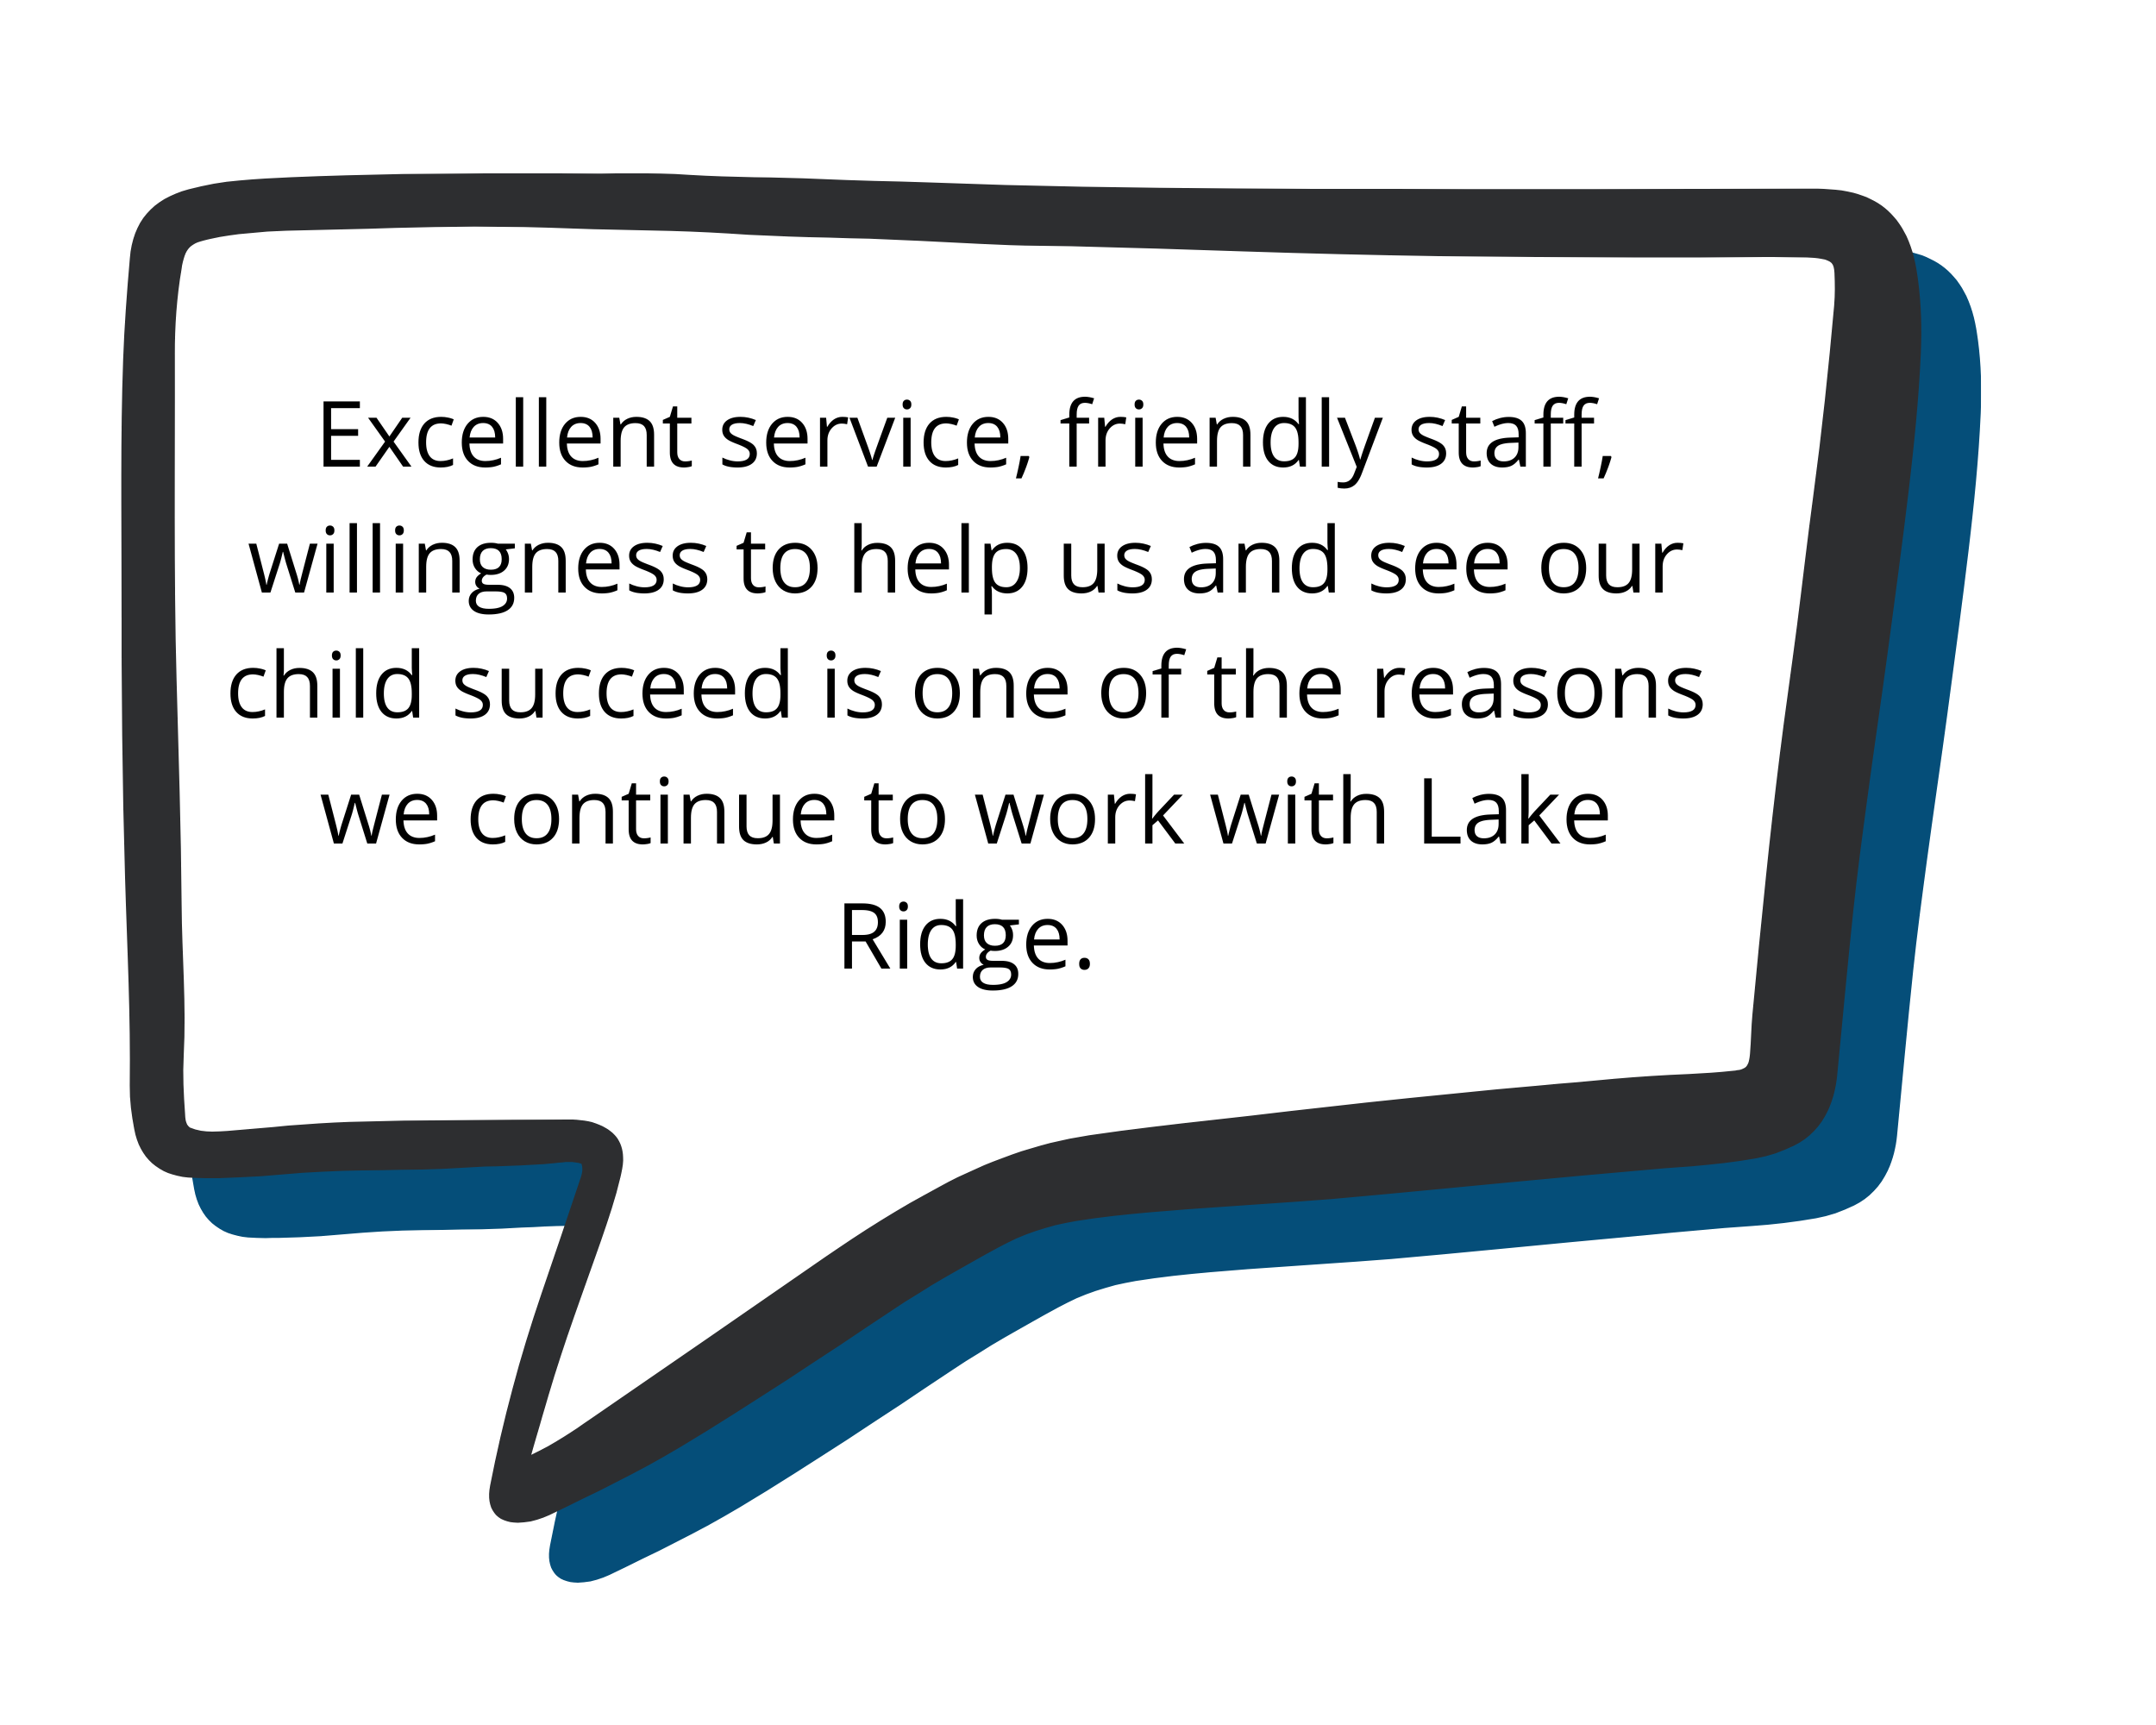    Excellent service, friendly staff, willingness to help us and see our child succeed is one of the reasons we continue to work with Lake Ridge.   